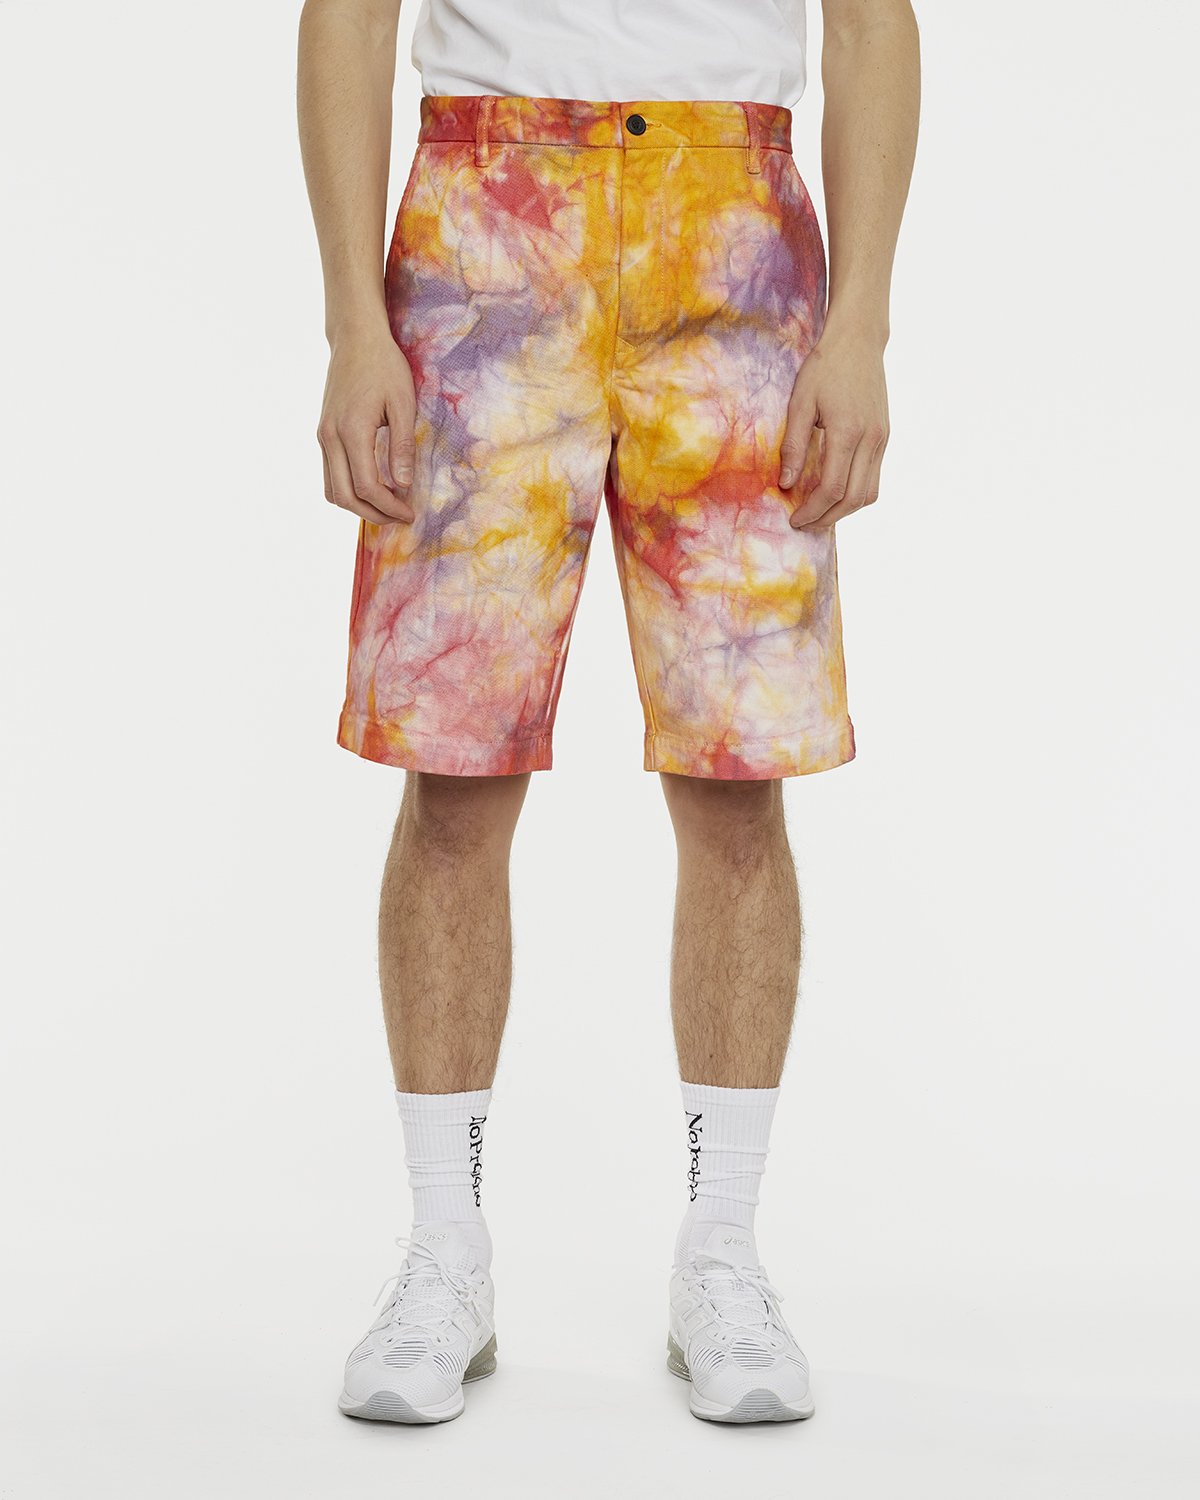 Aries - Tie Dye Chino Shorts Multicolor - Clothing - Multi - Image 3